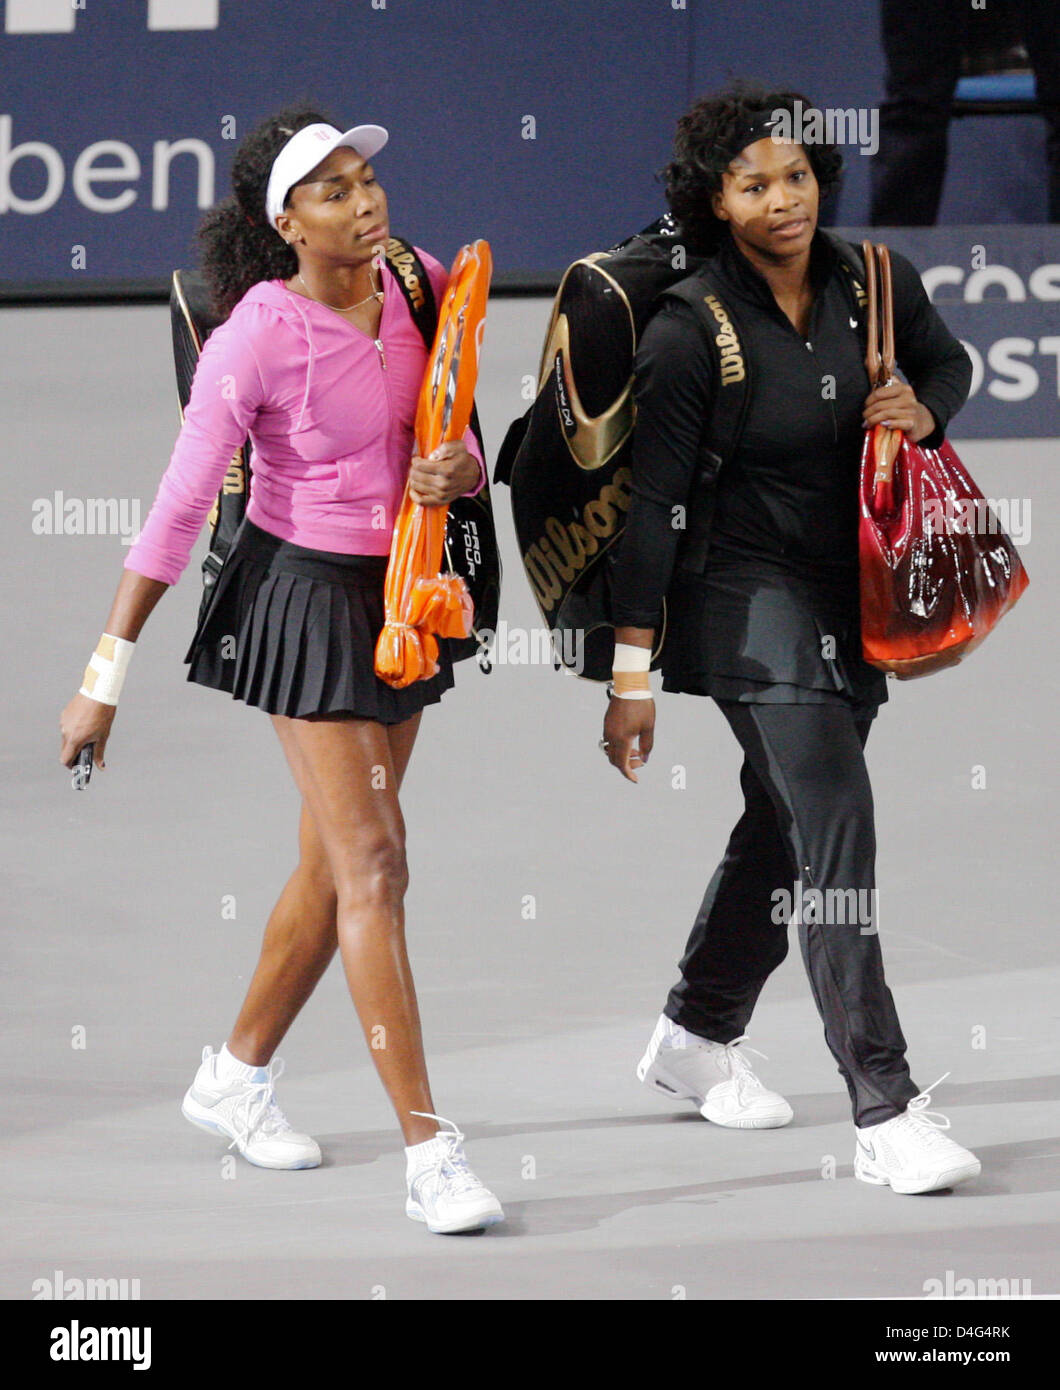 US tennis sisters Serena (R) and Venus Williams arrive for their doubles match against Slovakia's Daniela Hantuchova and Hungary's Agnes Szavay at the WTA Porsche Grand Prix in Stuttgart, Germany, 29 September 2008. Photo: Bernd Weissbrod Stock Photo